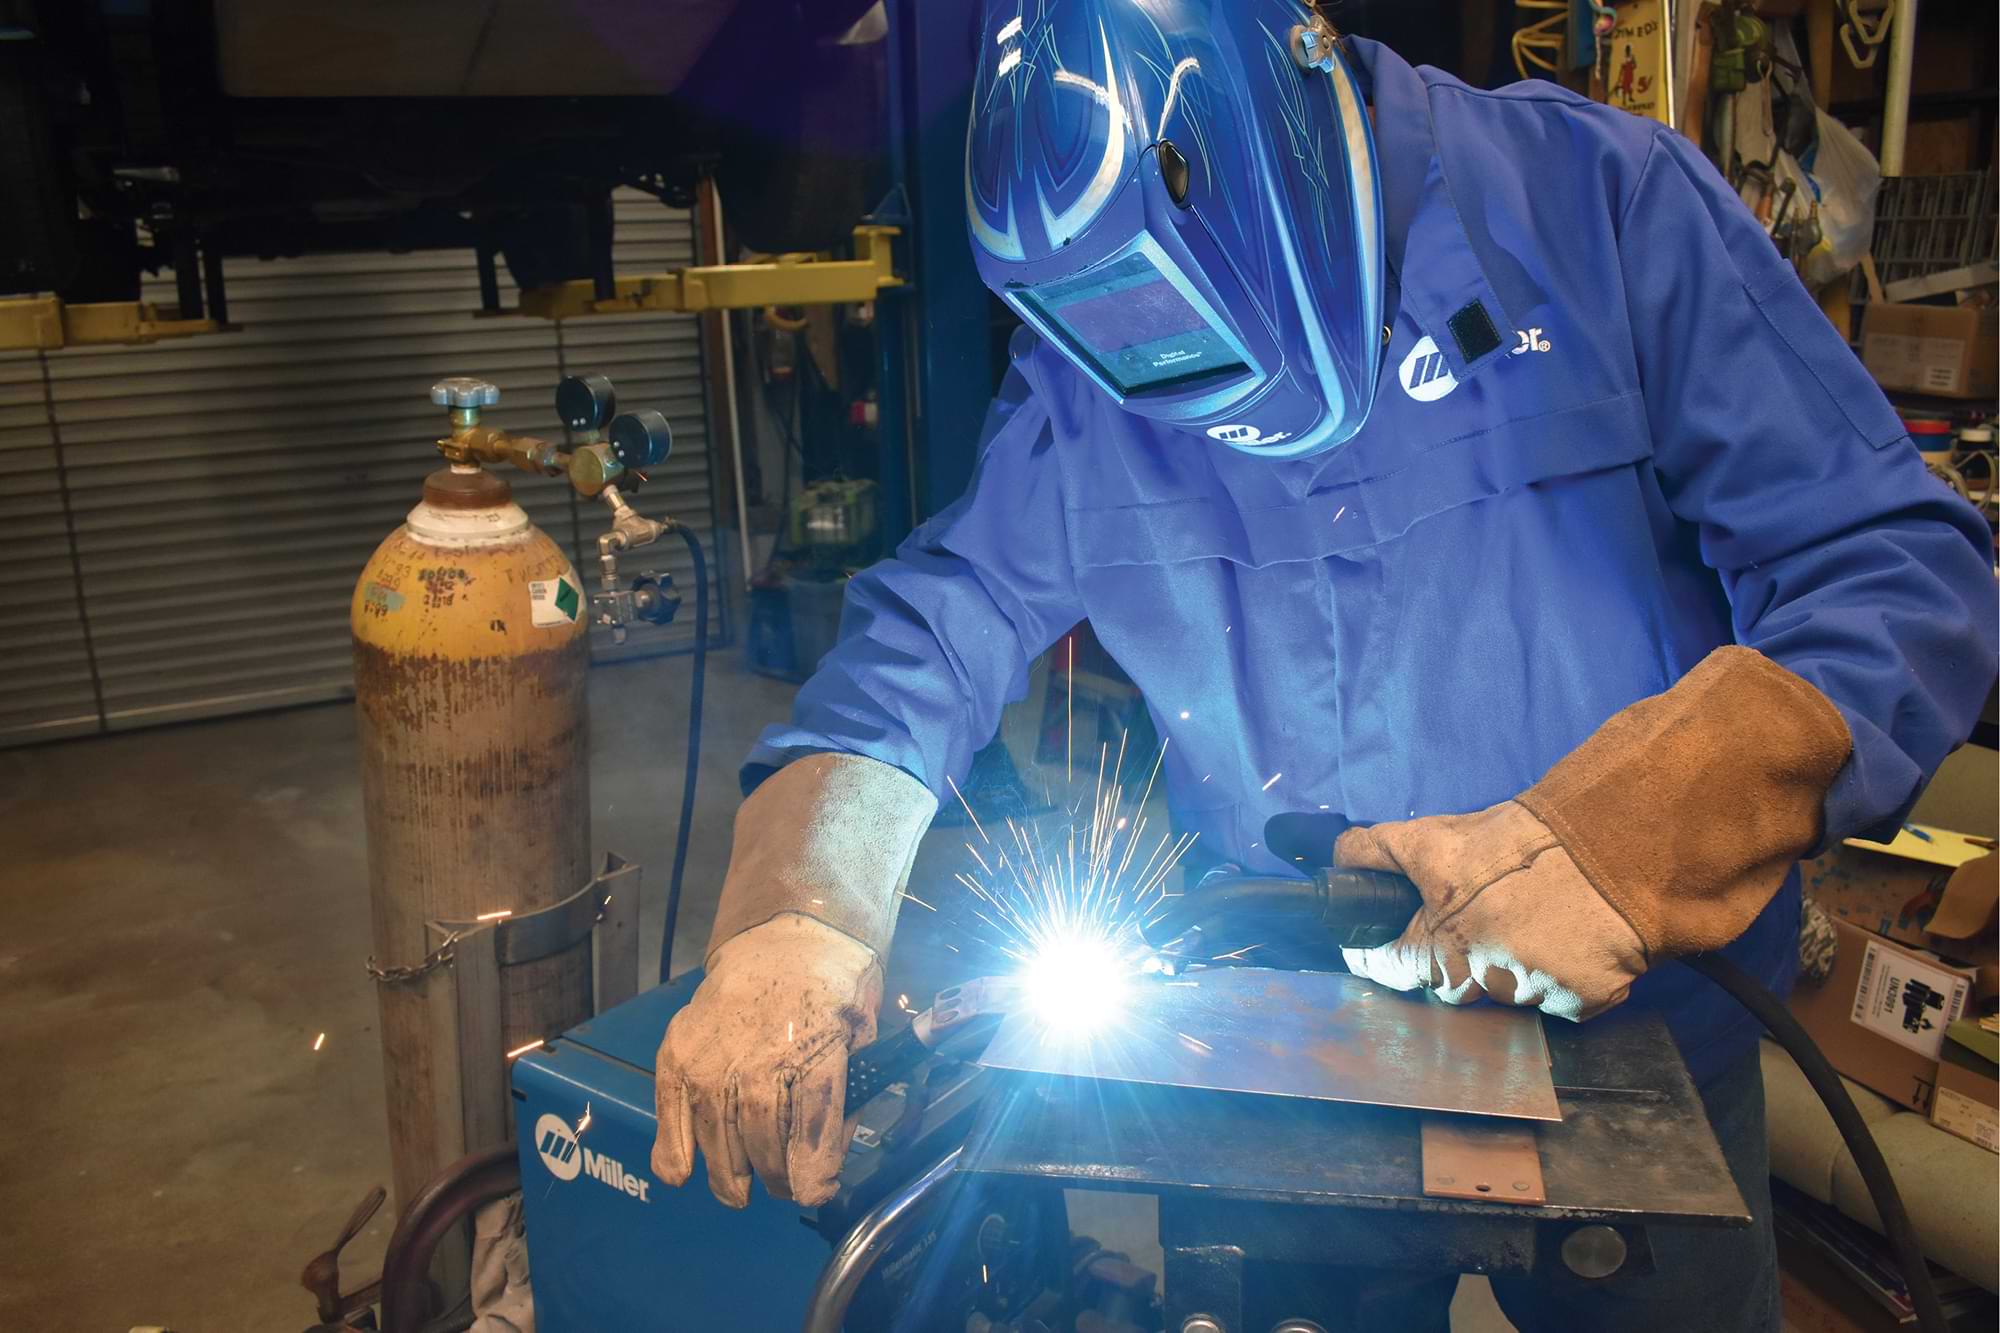 Paul Wilson prepared for welding up holes in his ’52 Chevy pickup by adjusting his Miller Electric Manufacturing Company MIG welder on a scrap piece of sheetmetal.